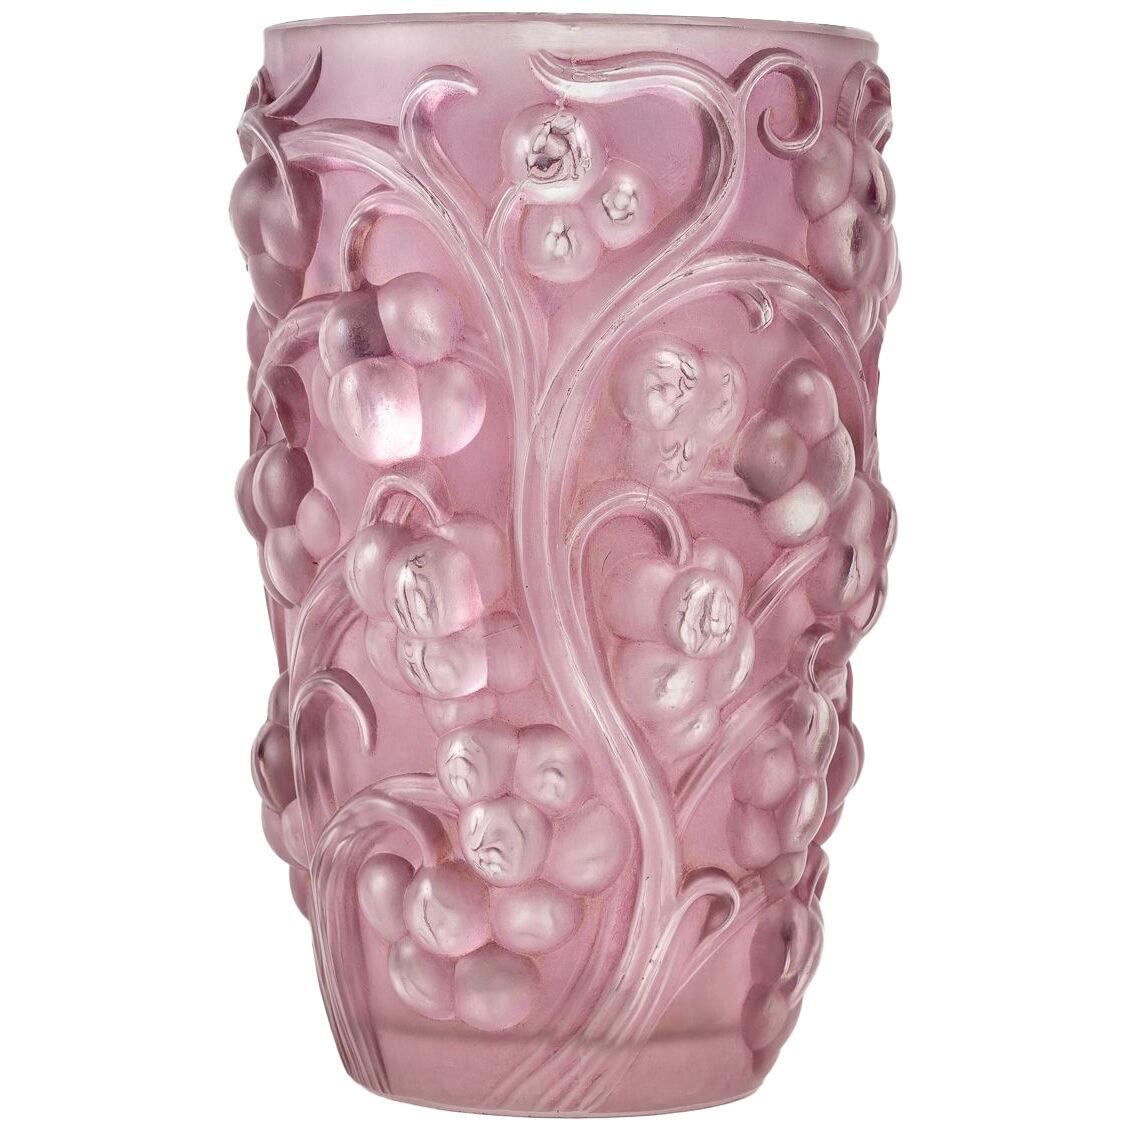 1928 René Lalique - Vase Raisins Frosted Glass With Pink Patina